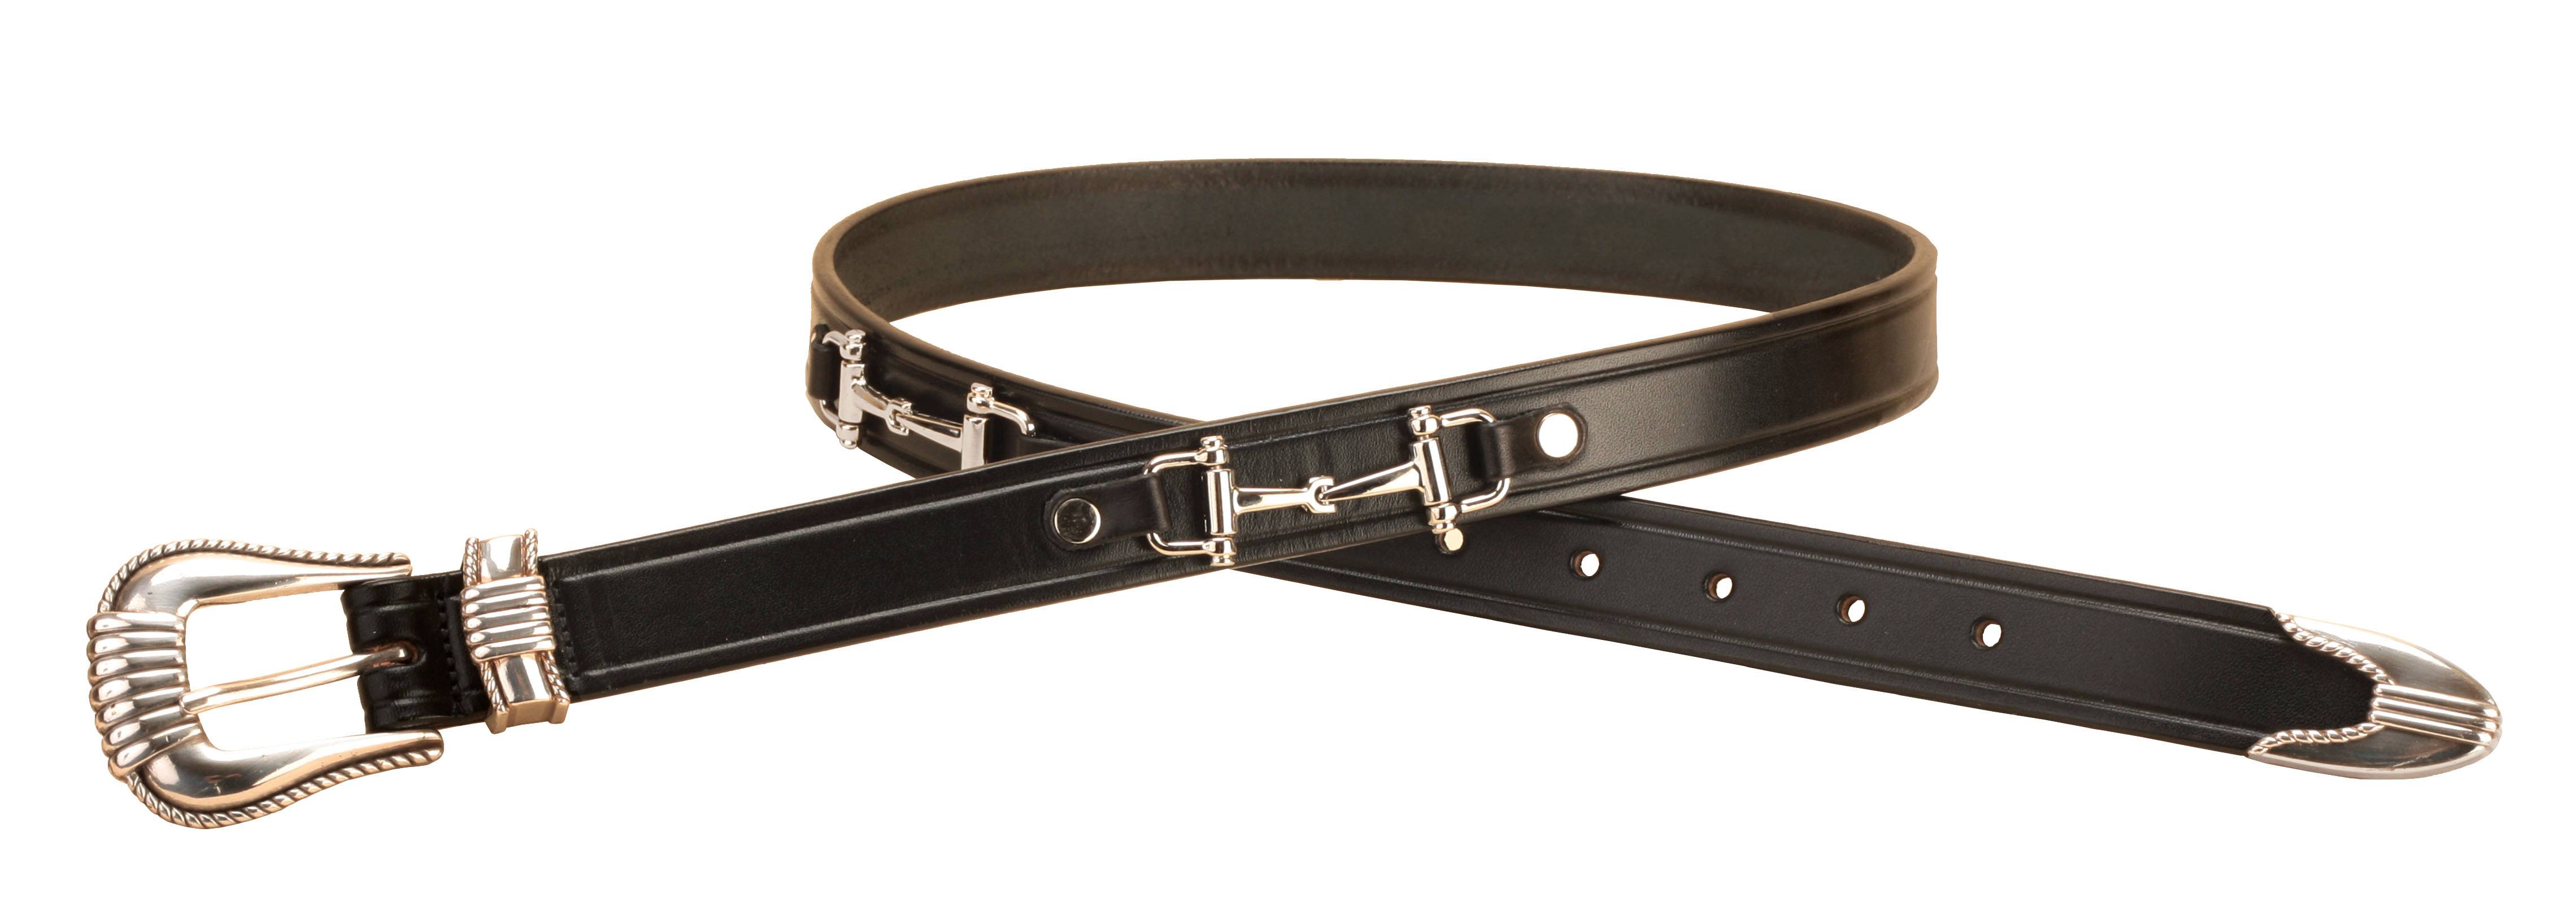 Tory Leather Silver Snaffle Bits Belt & 3-Piece Buckle Set